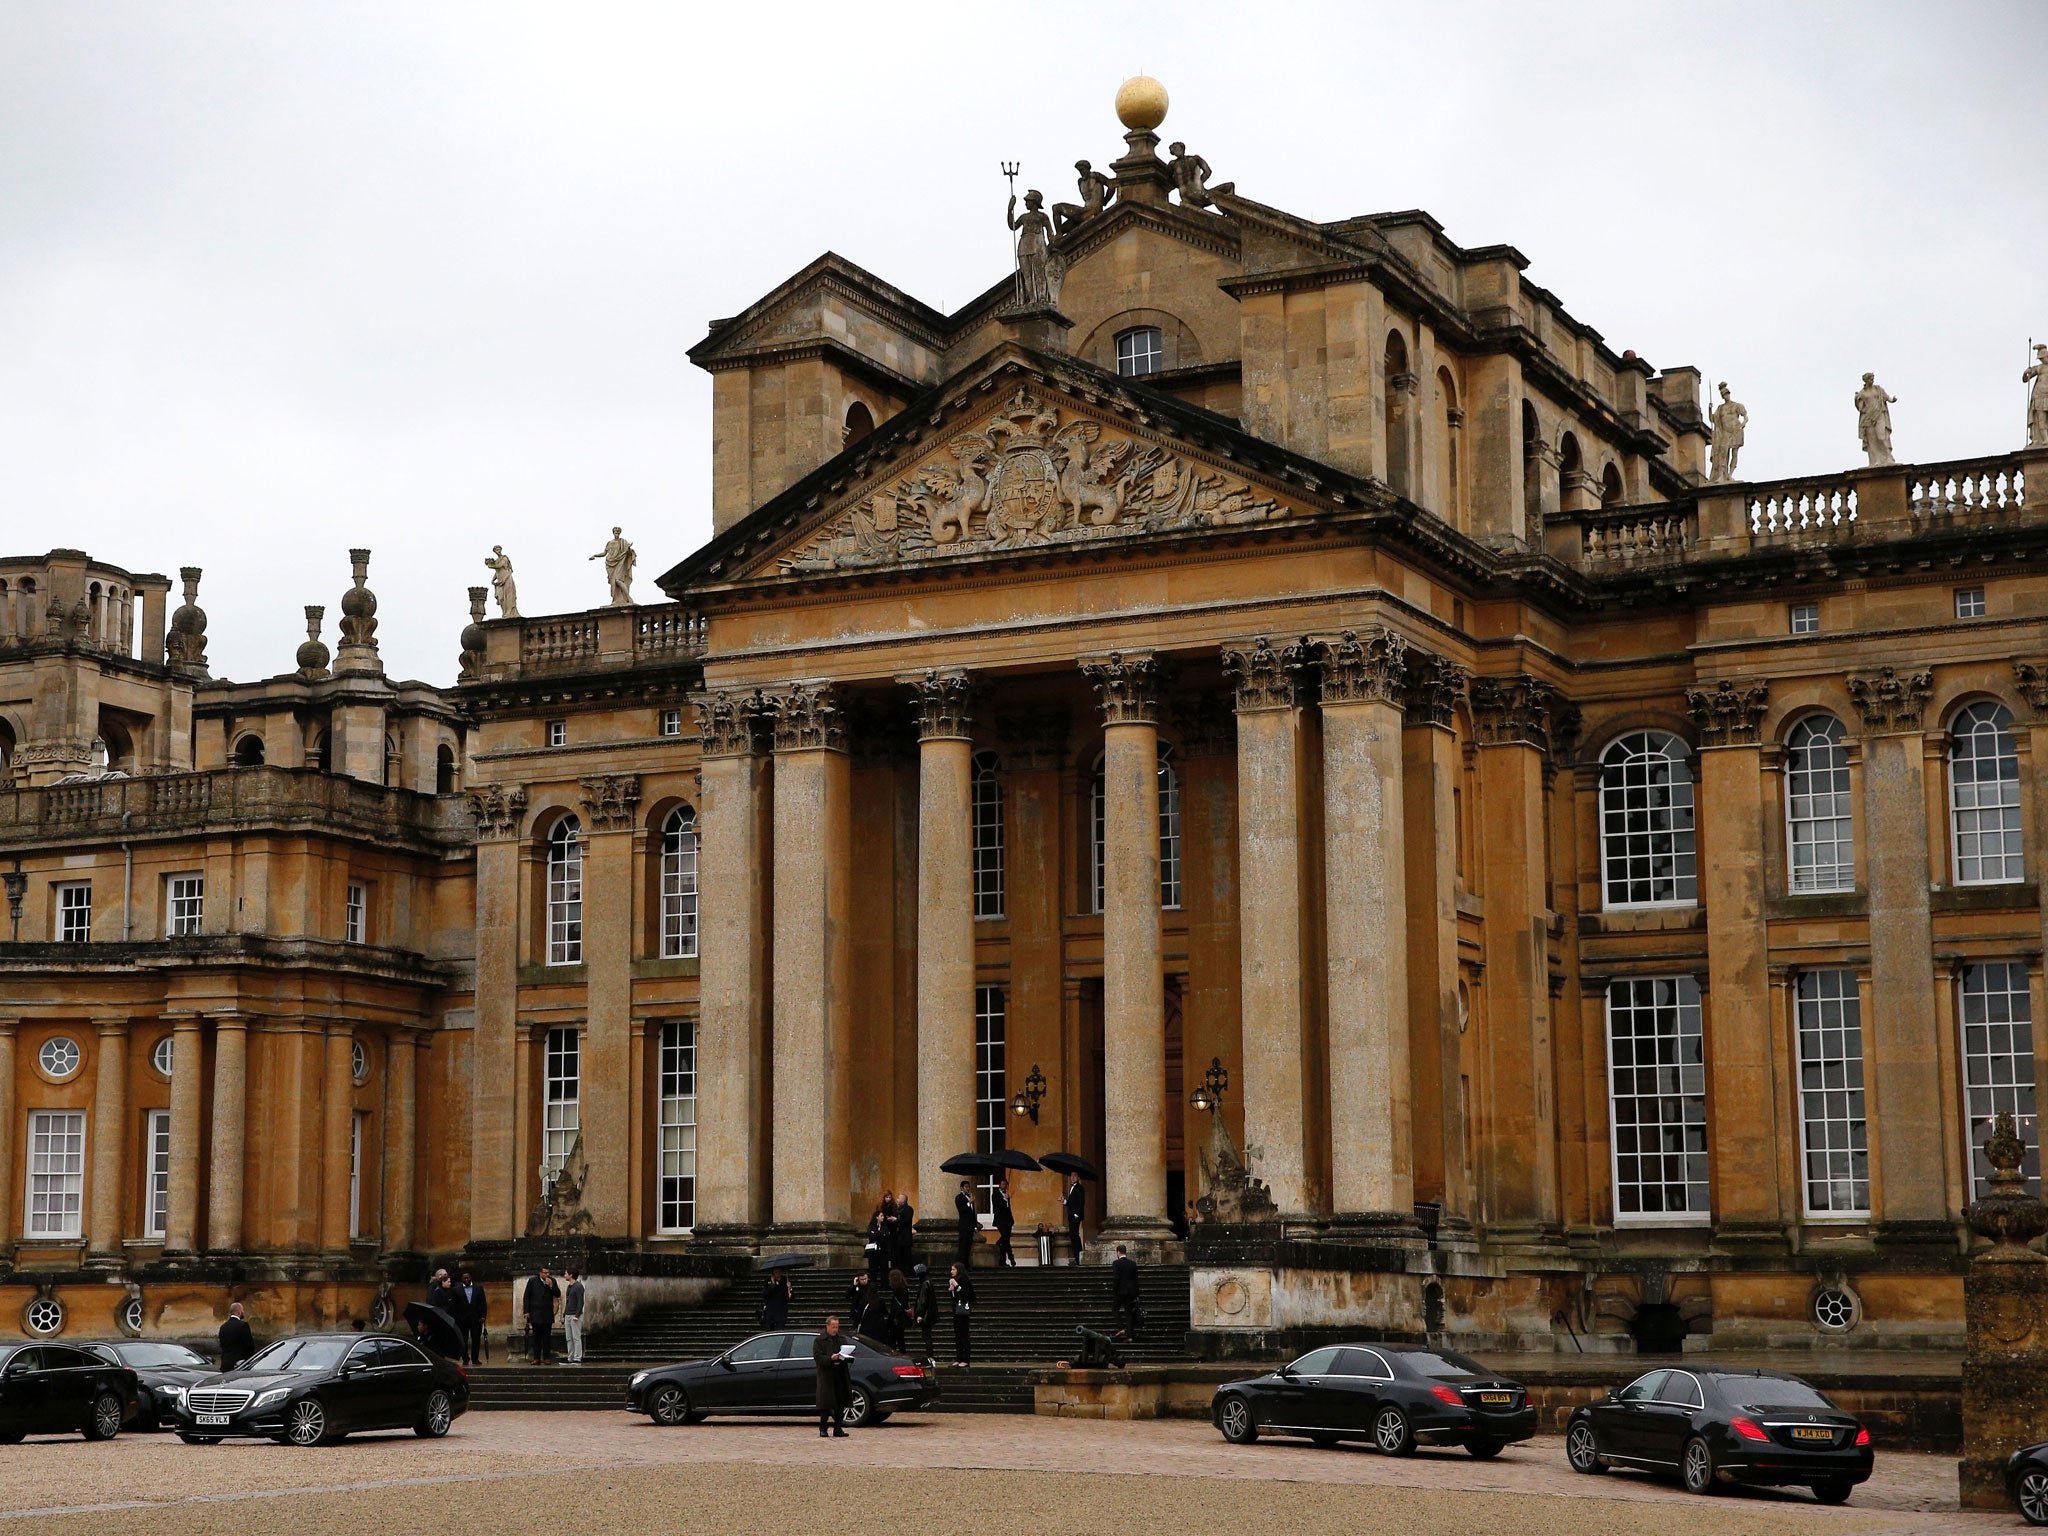 Blenheim Palace prior to the Dior Cruise show on Tuesday